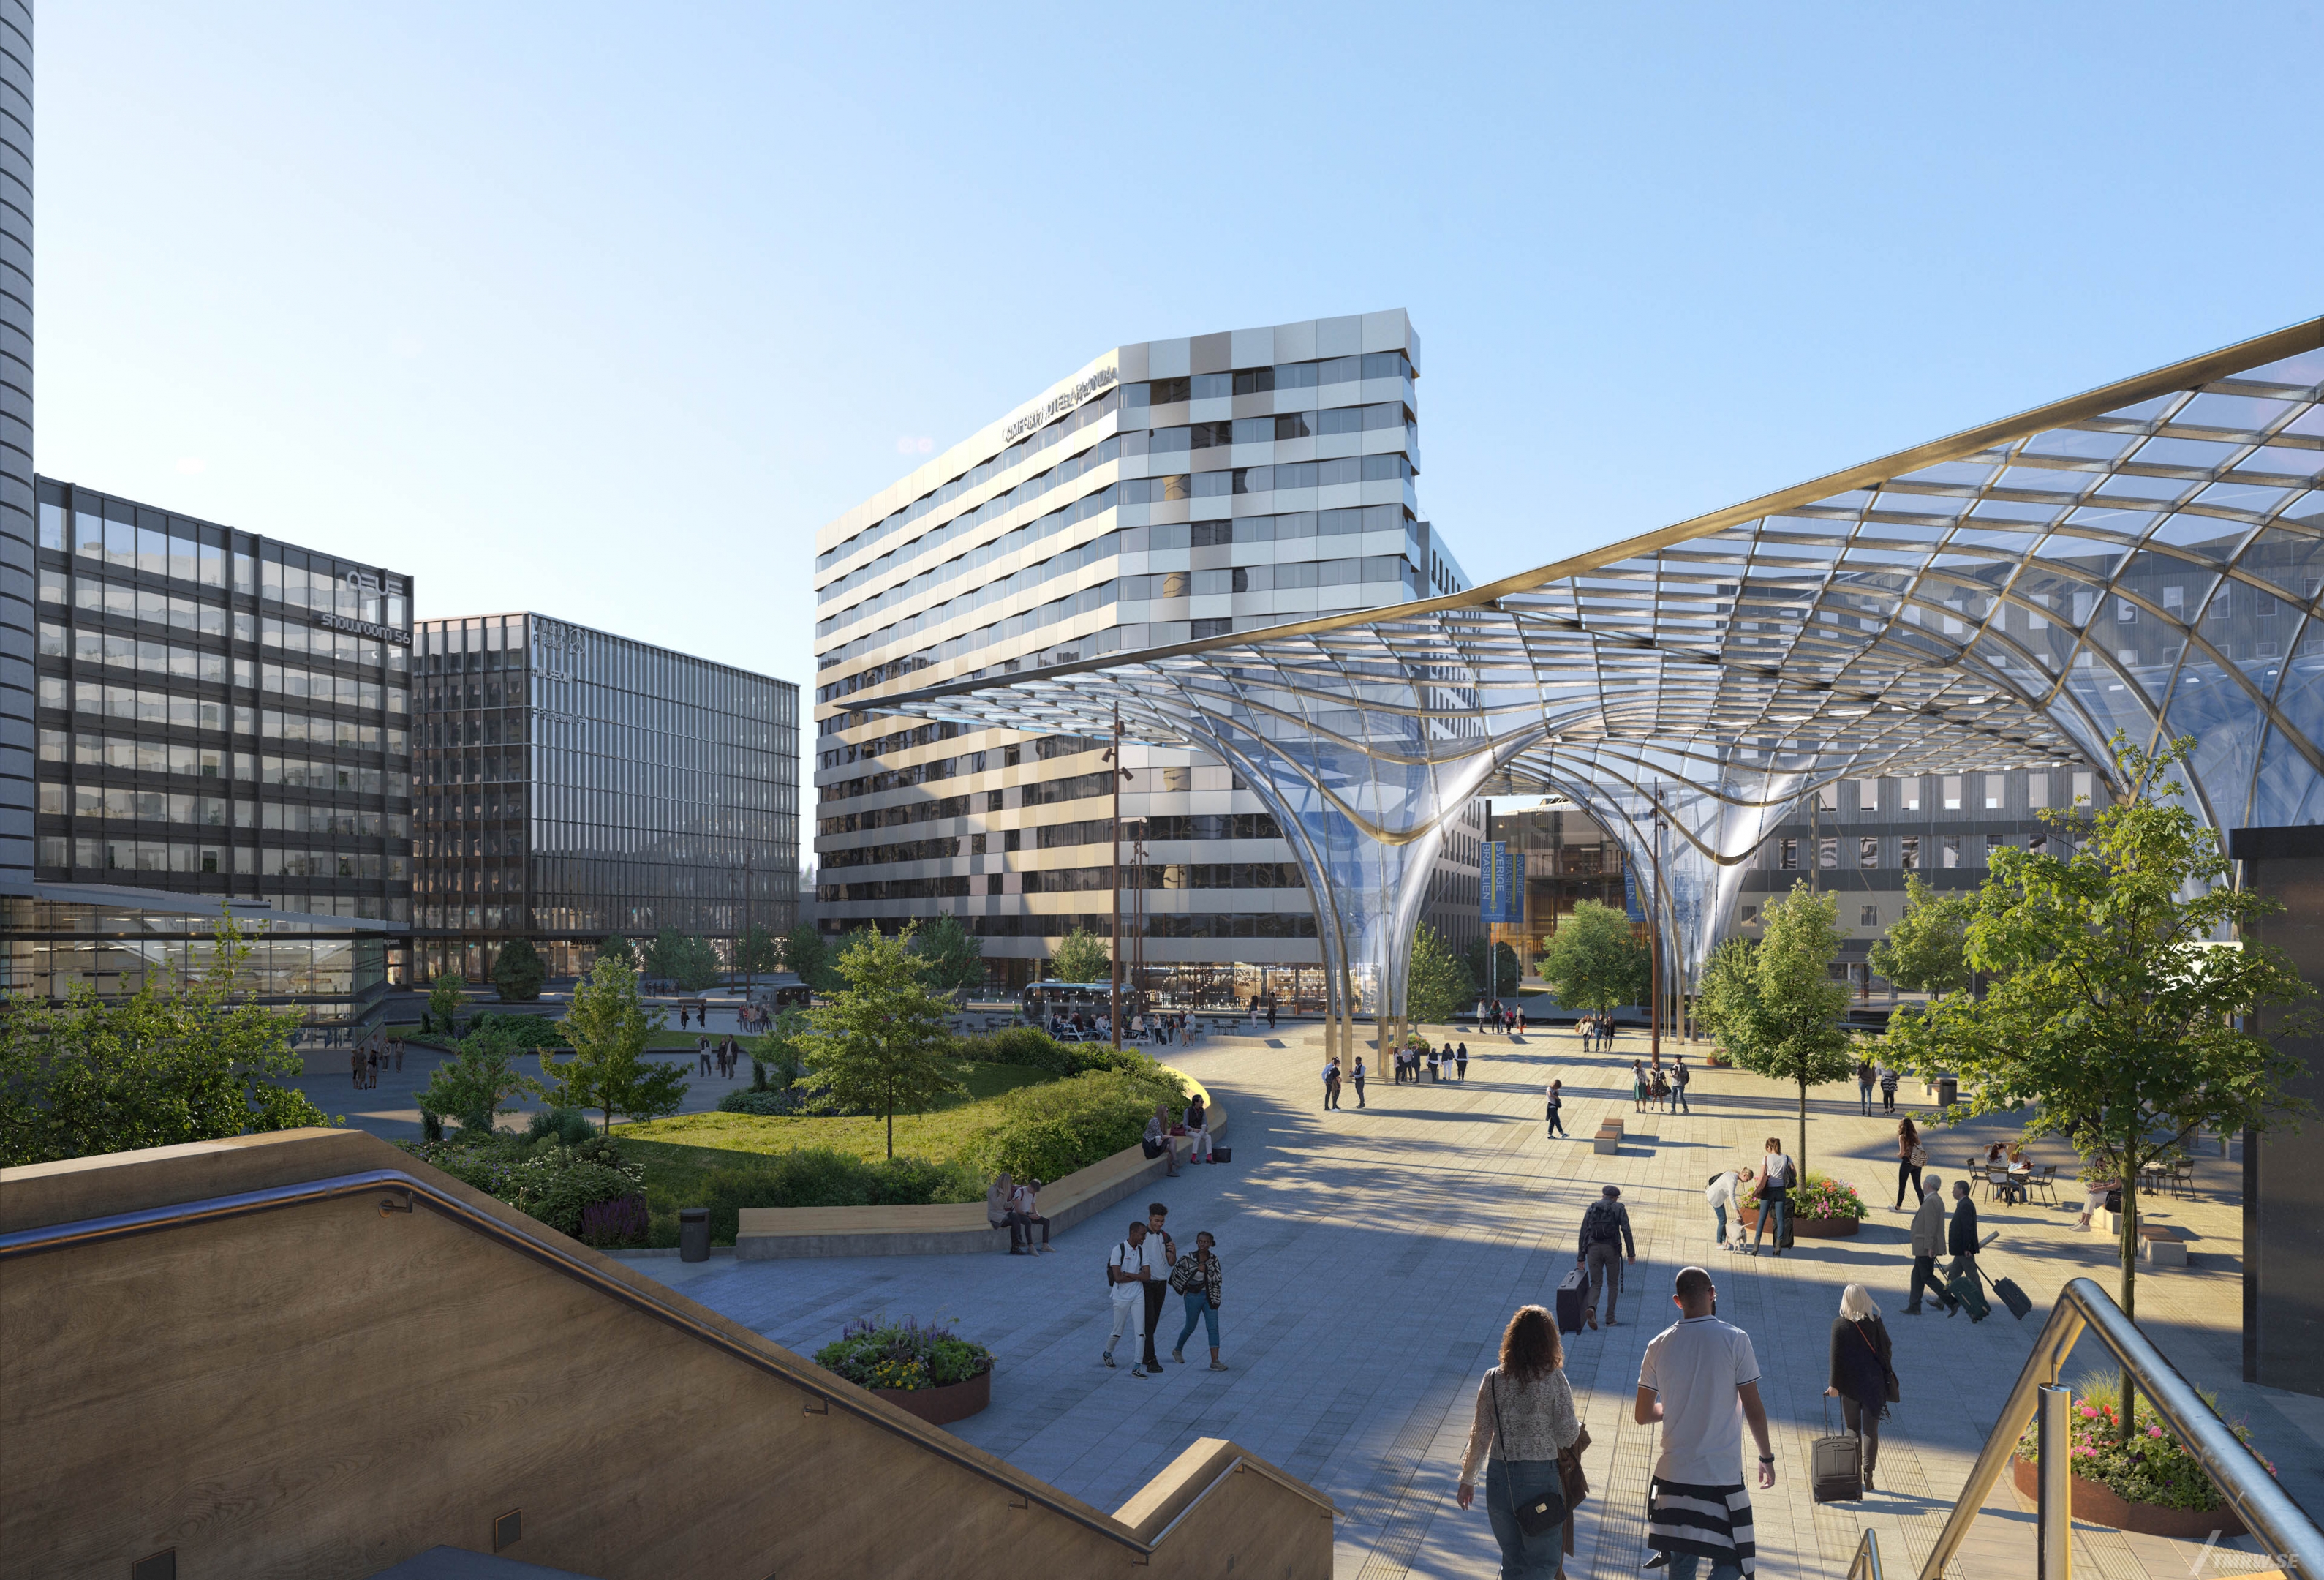 Architectural visualization of Arlanda for Bau, a civic area and a airport in day light from a street view.